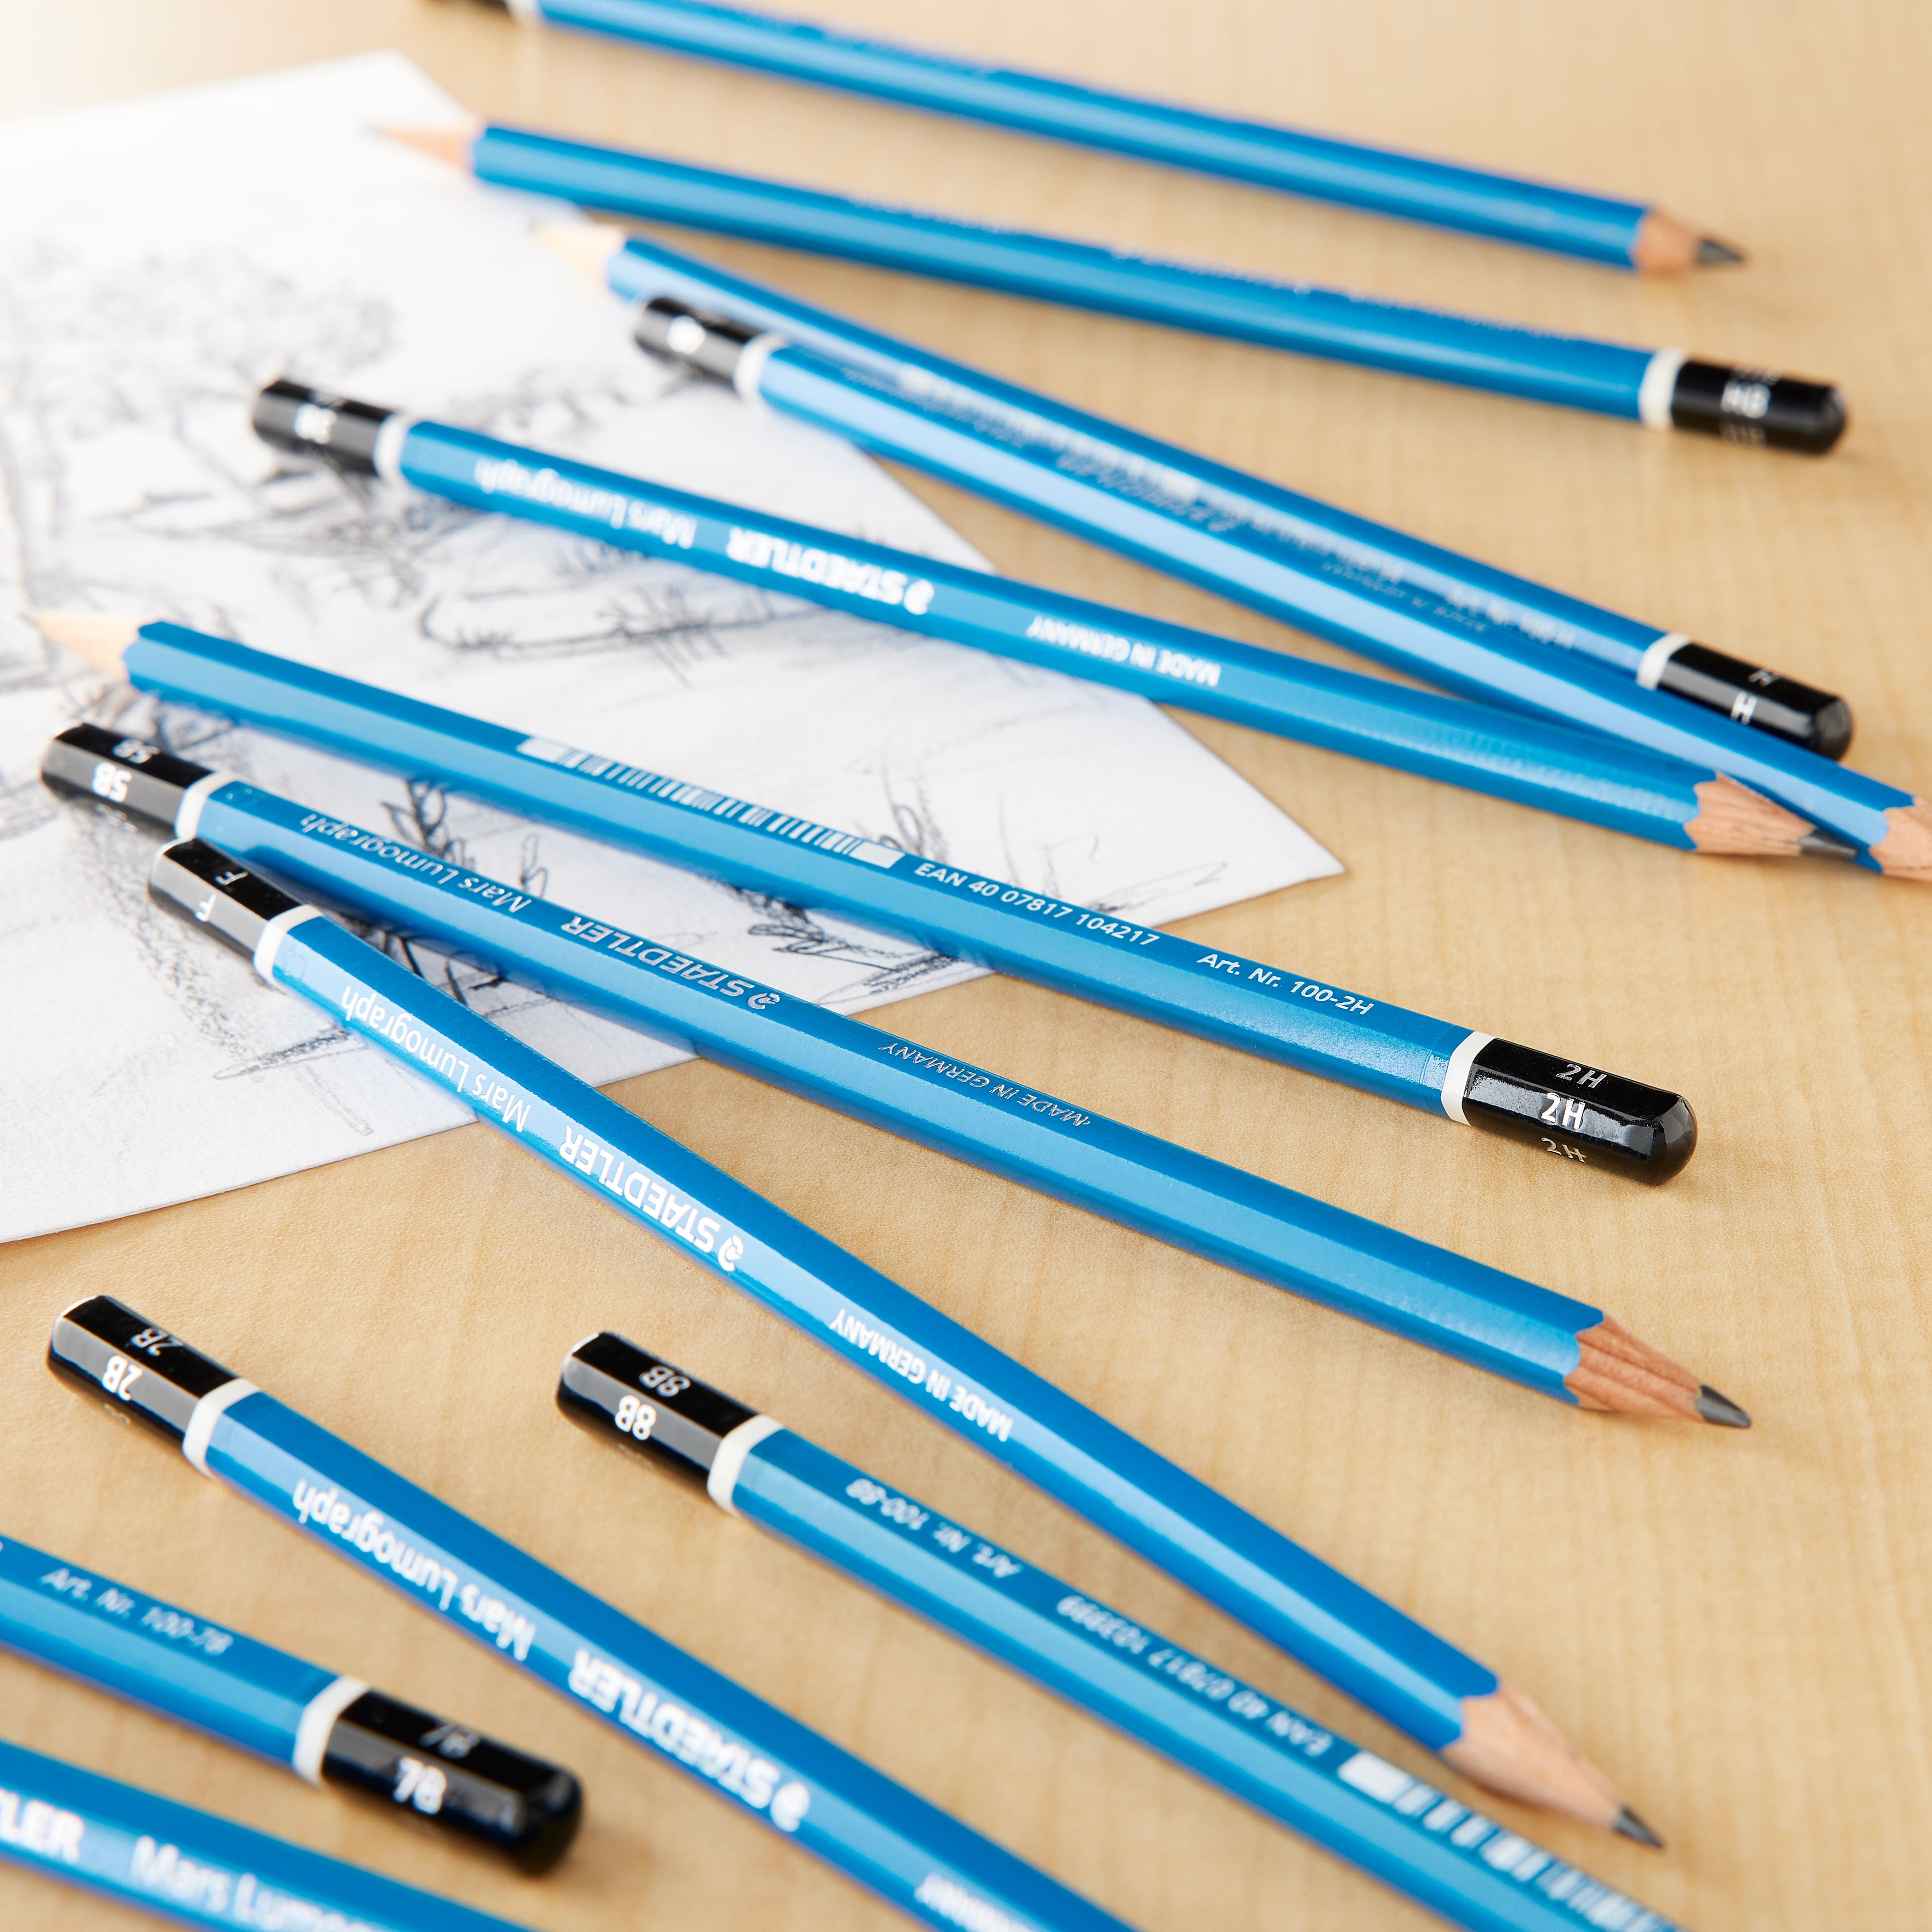 Art Supplies Reviews and Manga Cartoon Sketching: Quick! Sharpen your Staedtler  Mars Lumograph pencils and get drawing